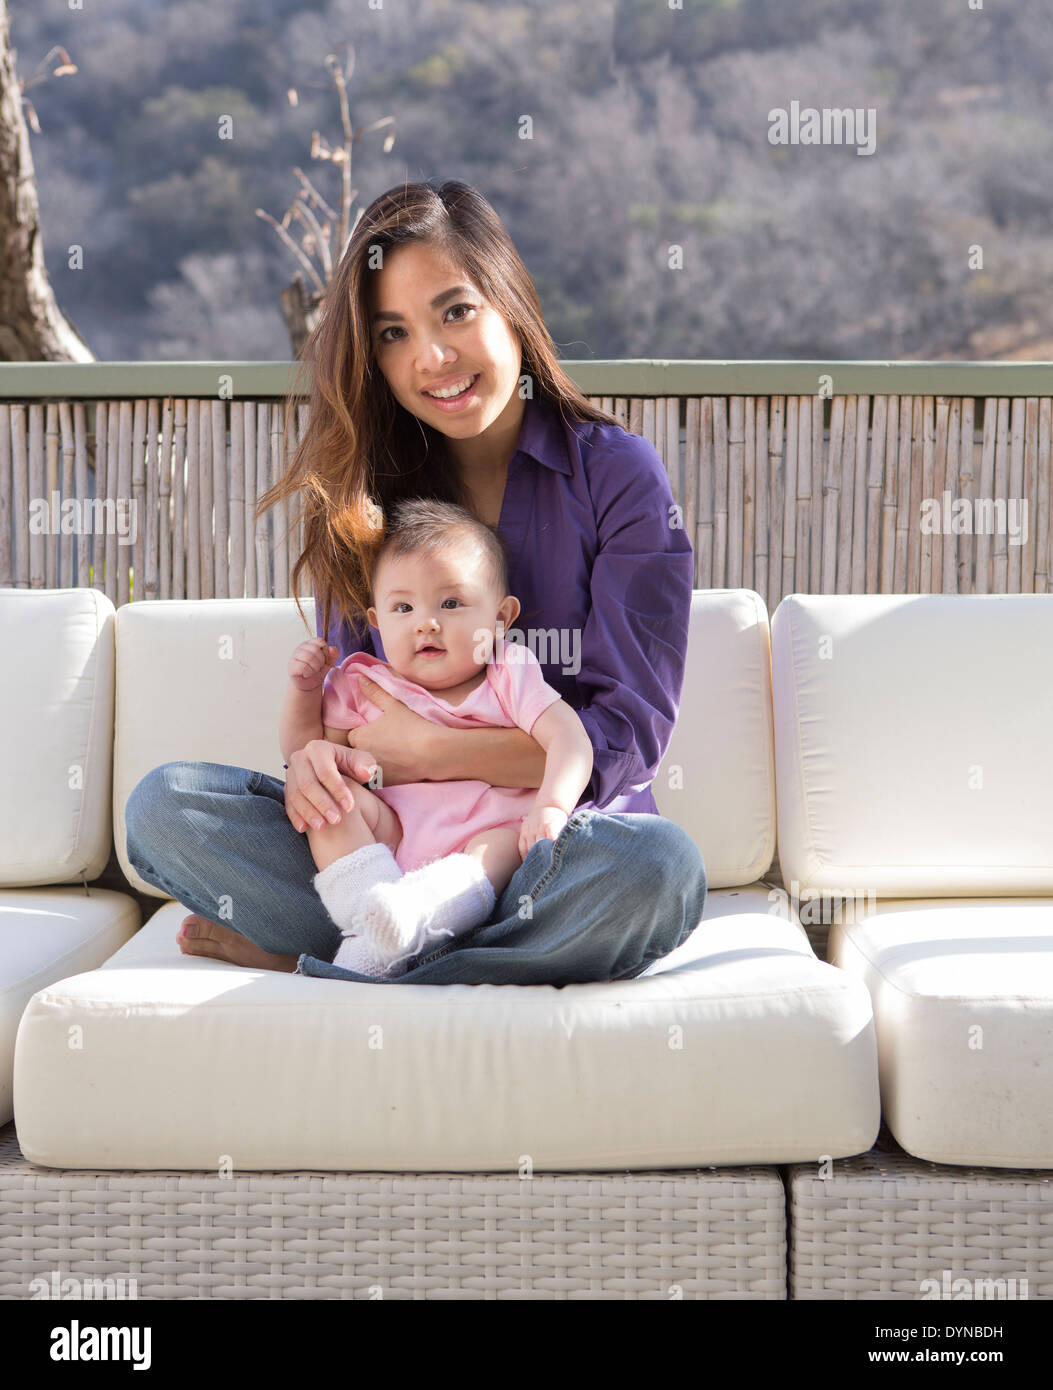 Mother holding baby girl on patio sofa Banque D'Images